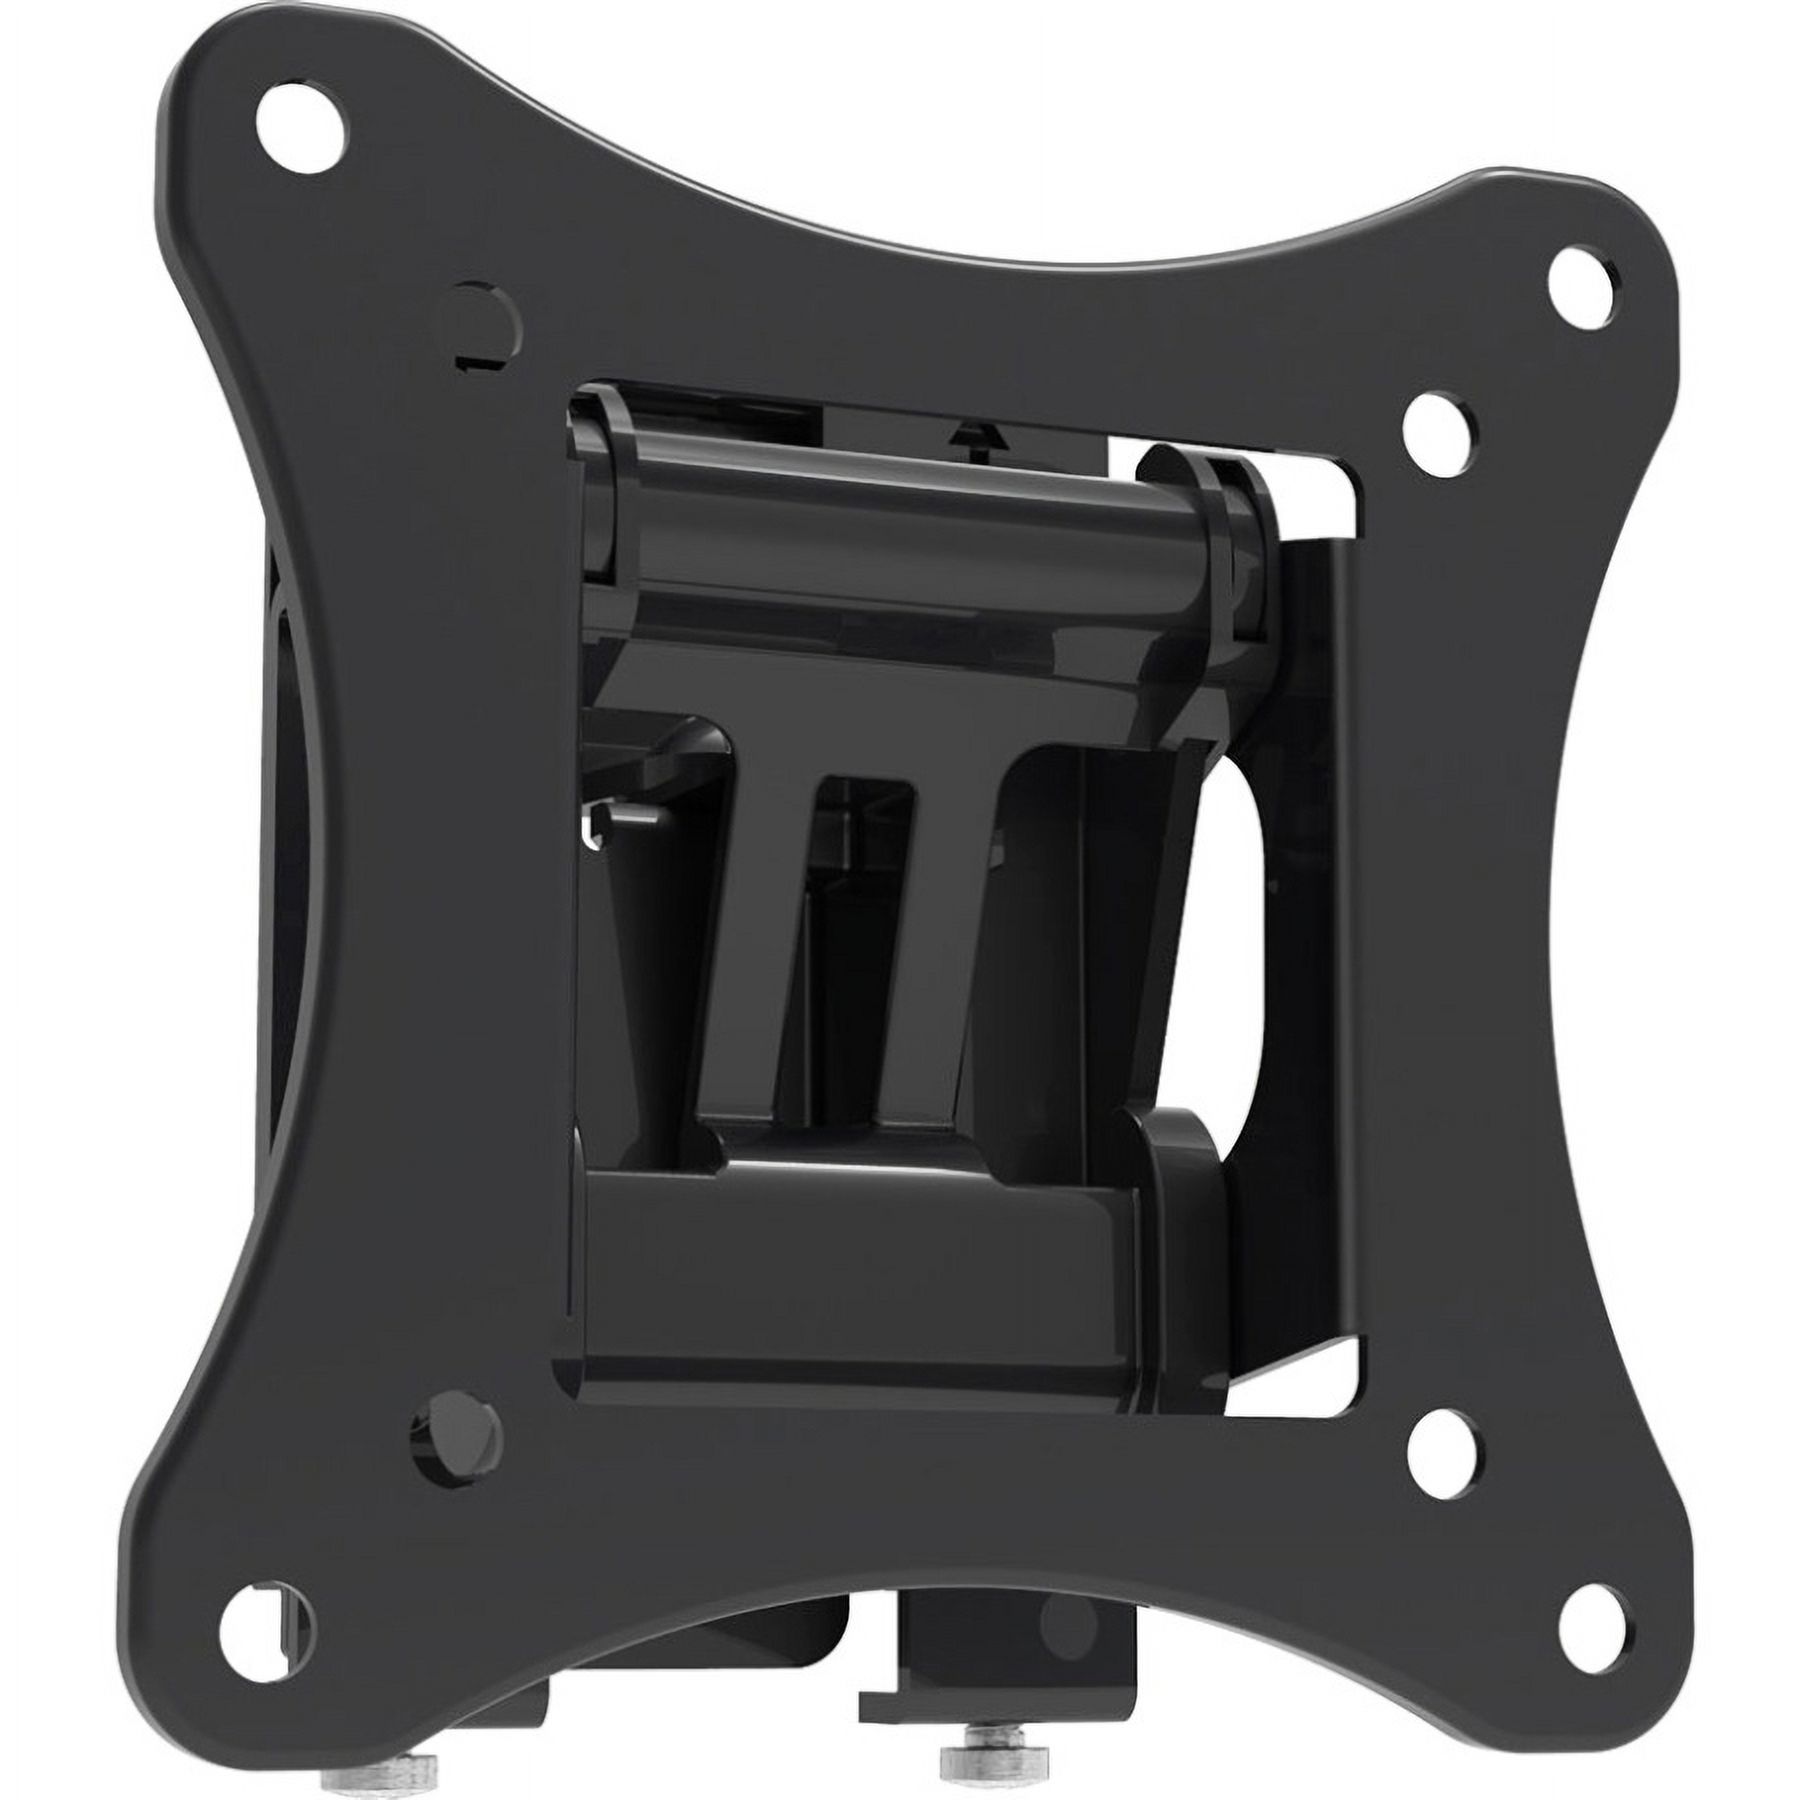 Pyle PSWLB61 10" to 24" Universal Flat Panel Tilt and Turn TV Wall Mount - image 2 of 2